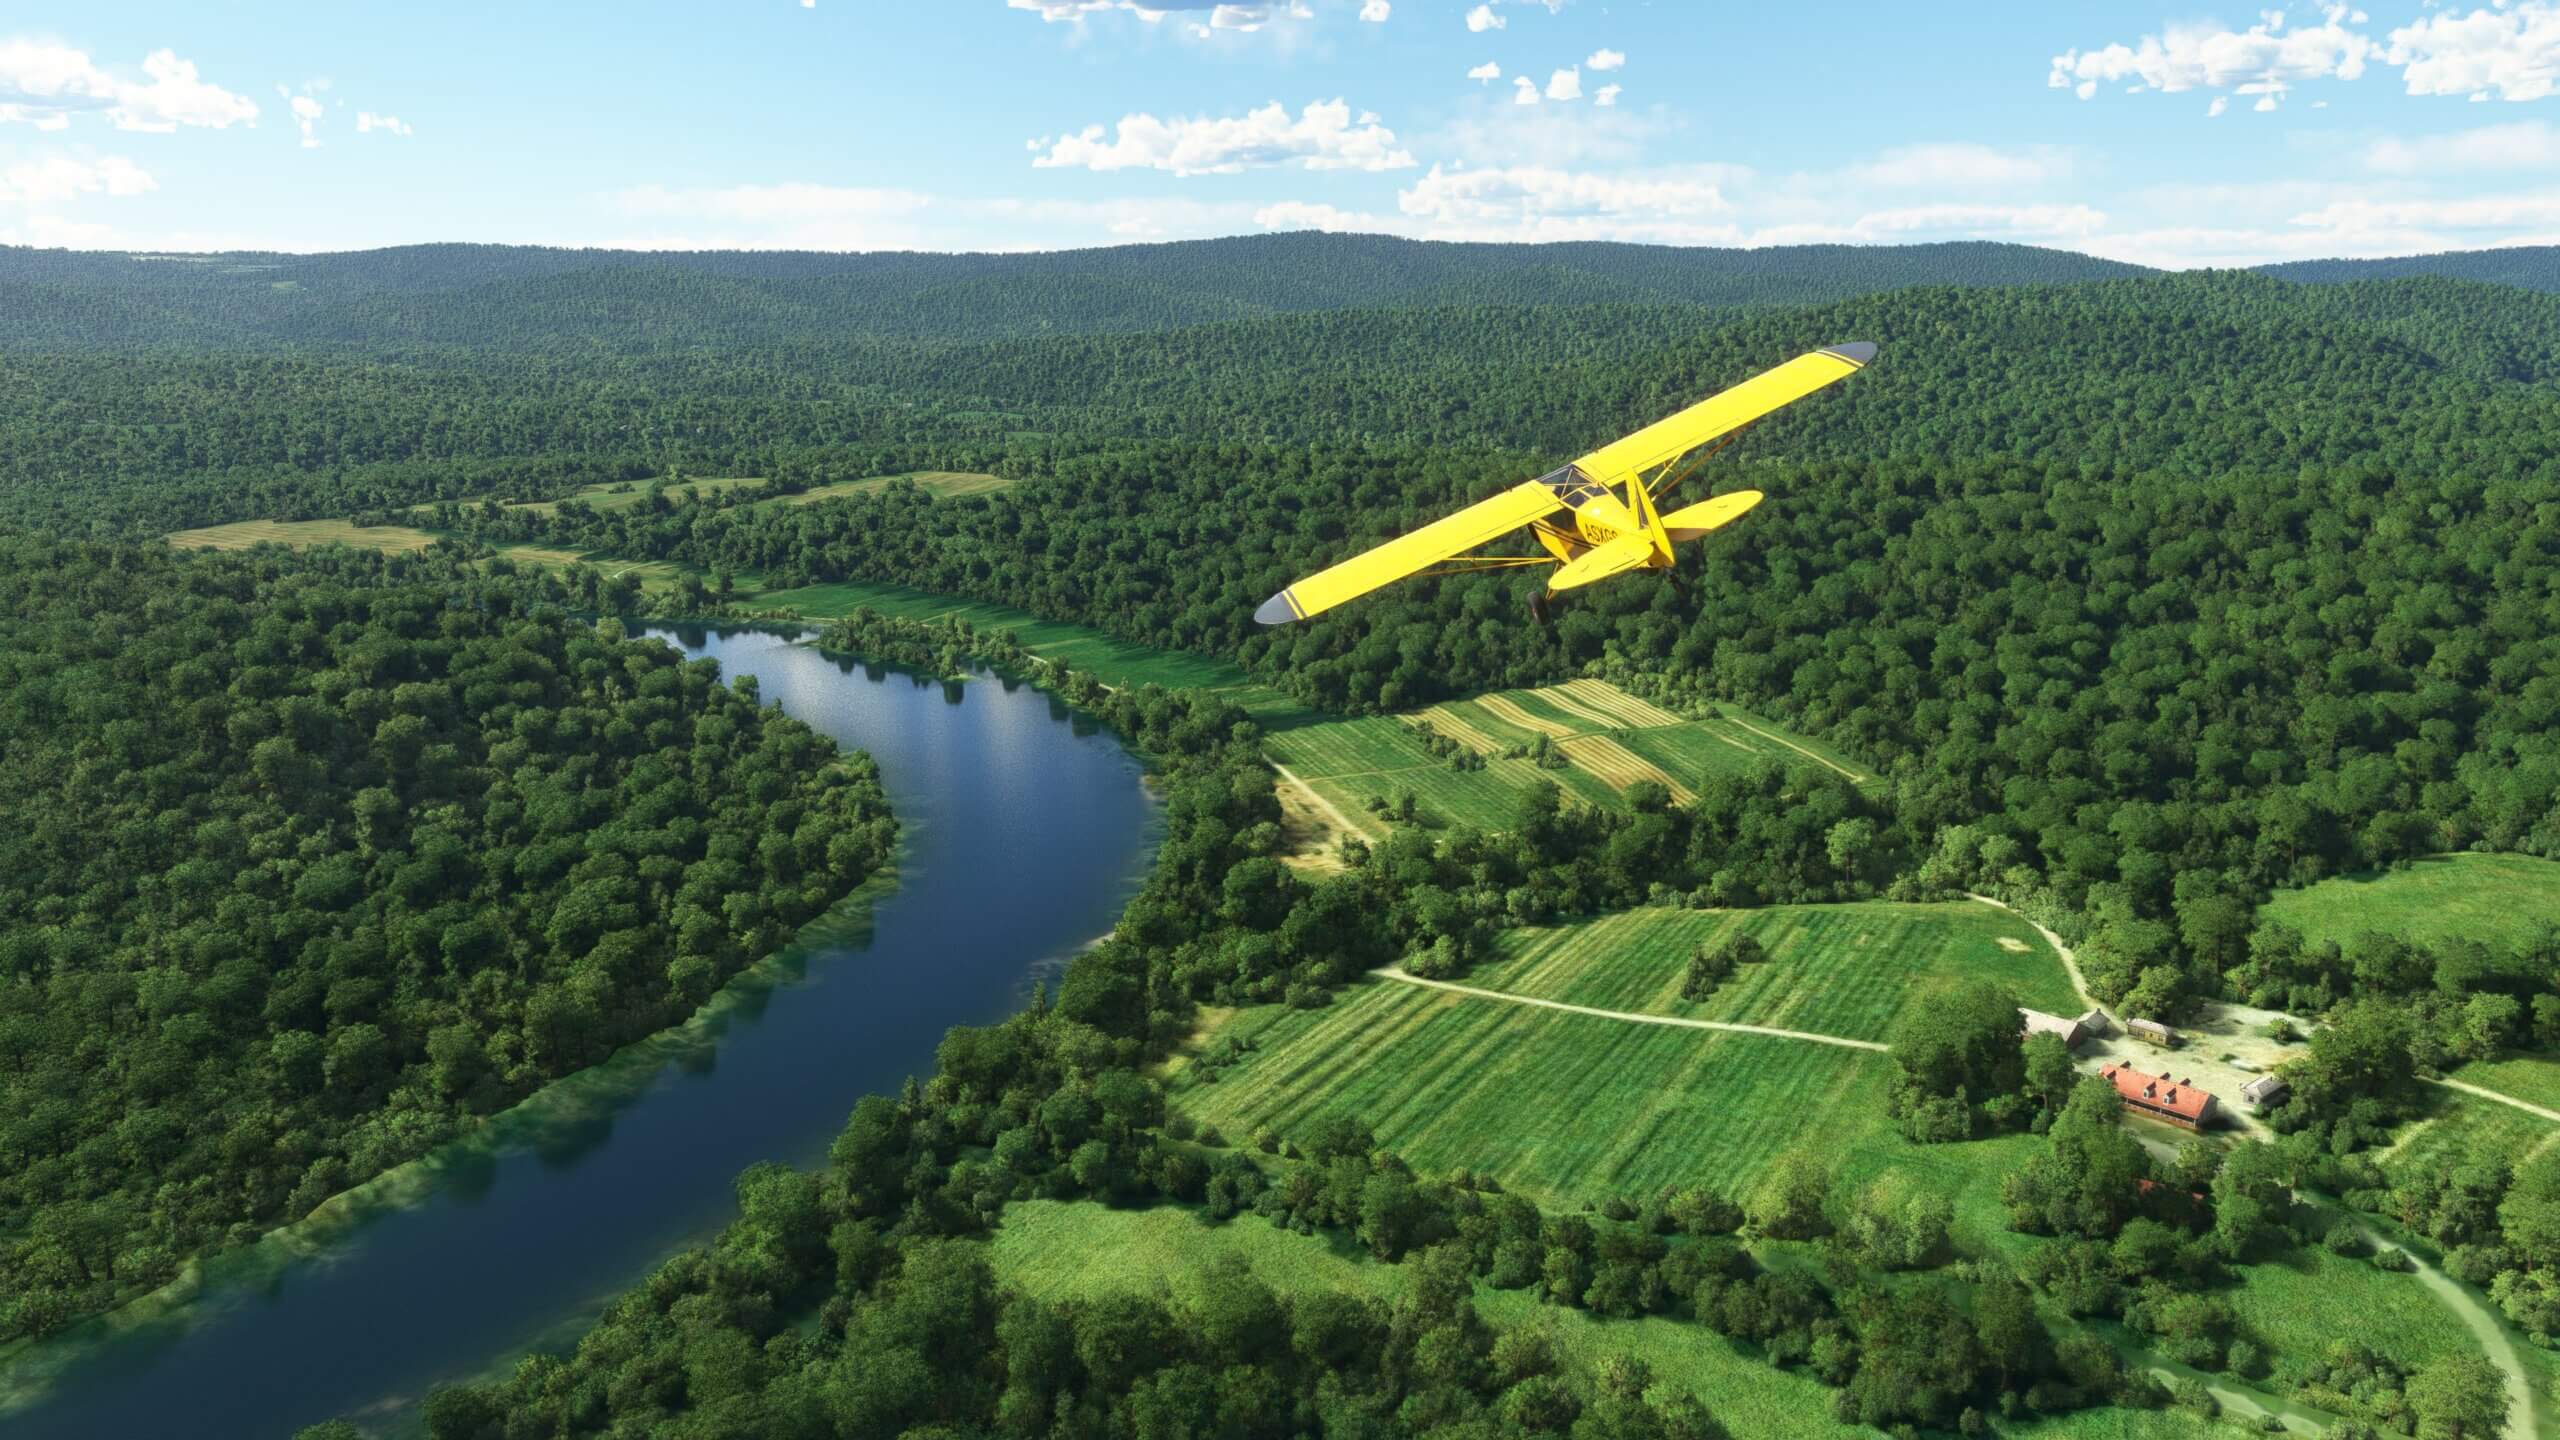 The Shock Ultra aircraft in yellow paint scheme follows a river below, which is surrounded by dense forestry and a country house below